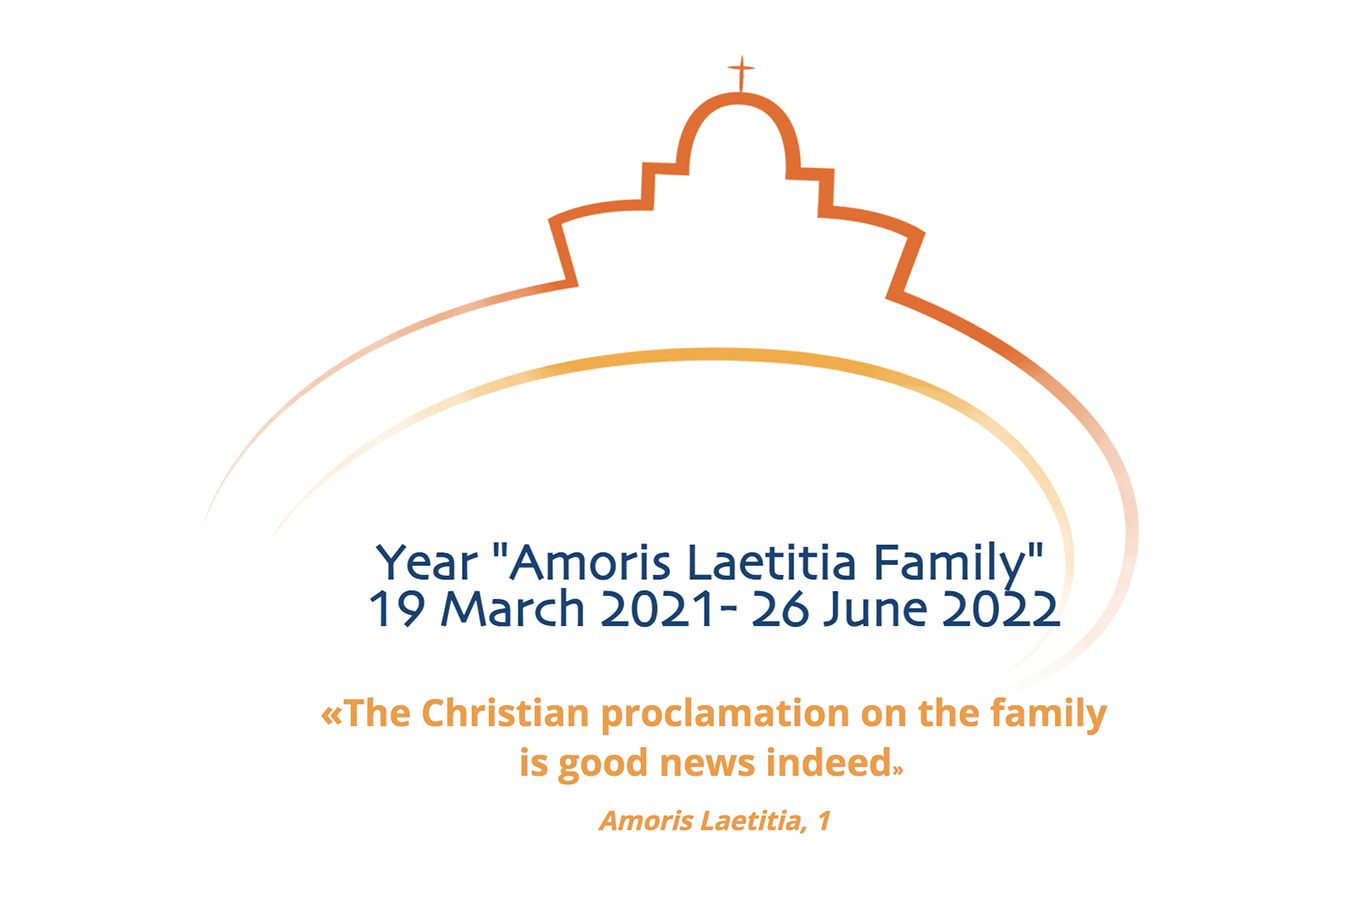 Online event, papal message to mark opening of &#39;Amoris laetitia&#39; year |  CBCPNews